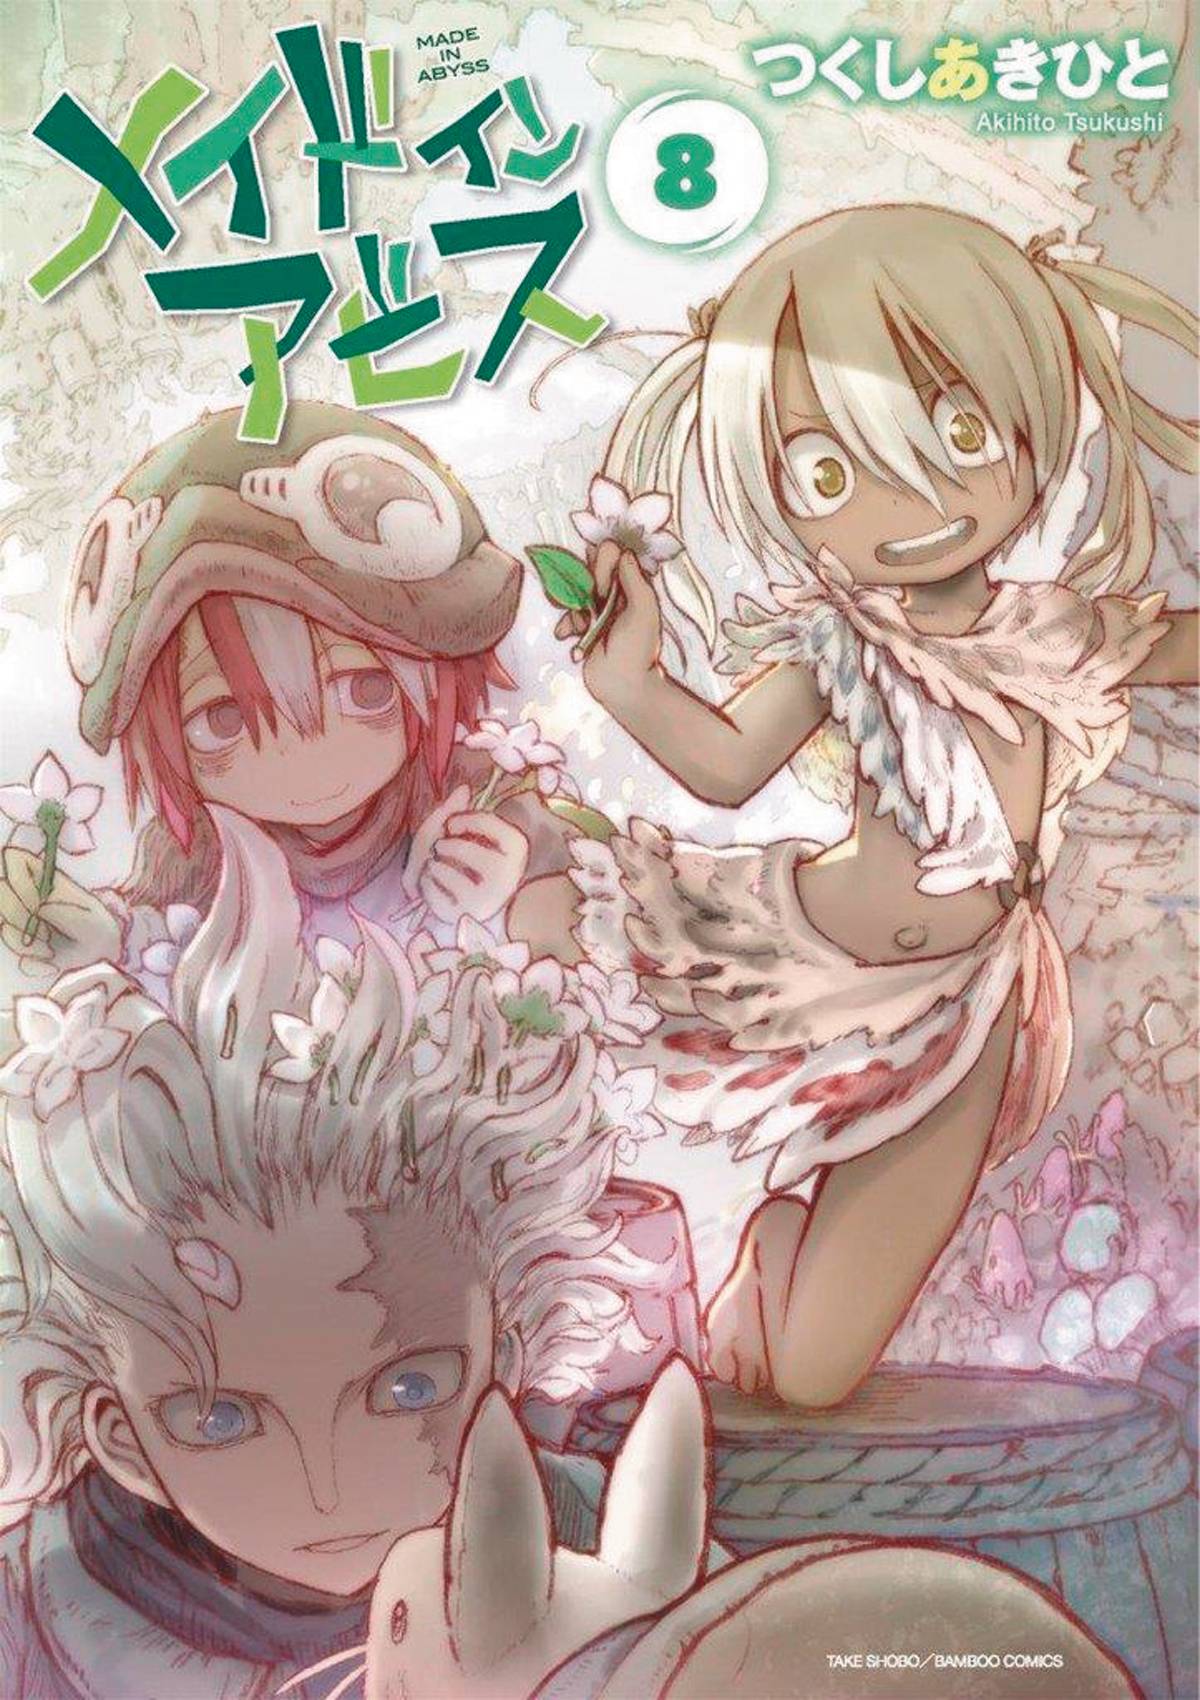 Made in Abyss Manga Volume 8